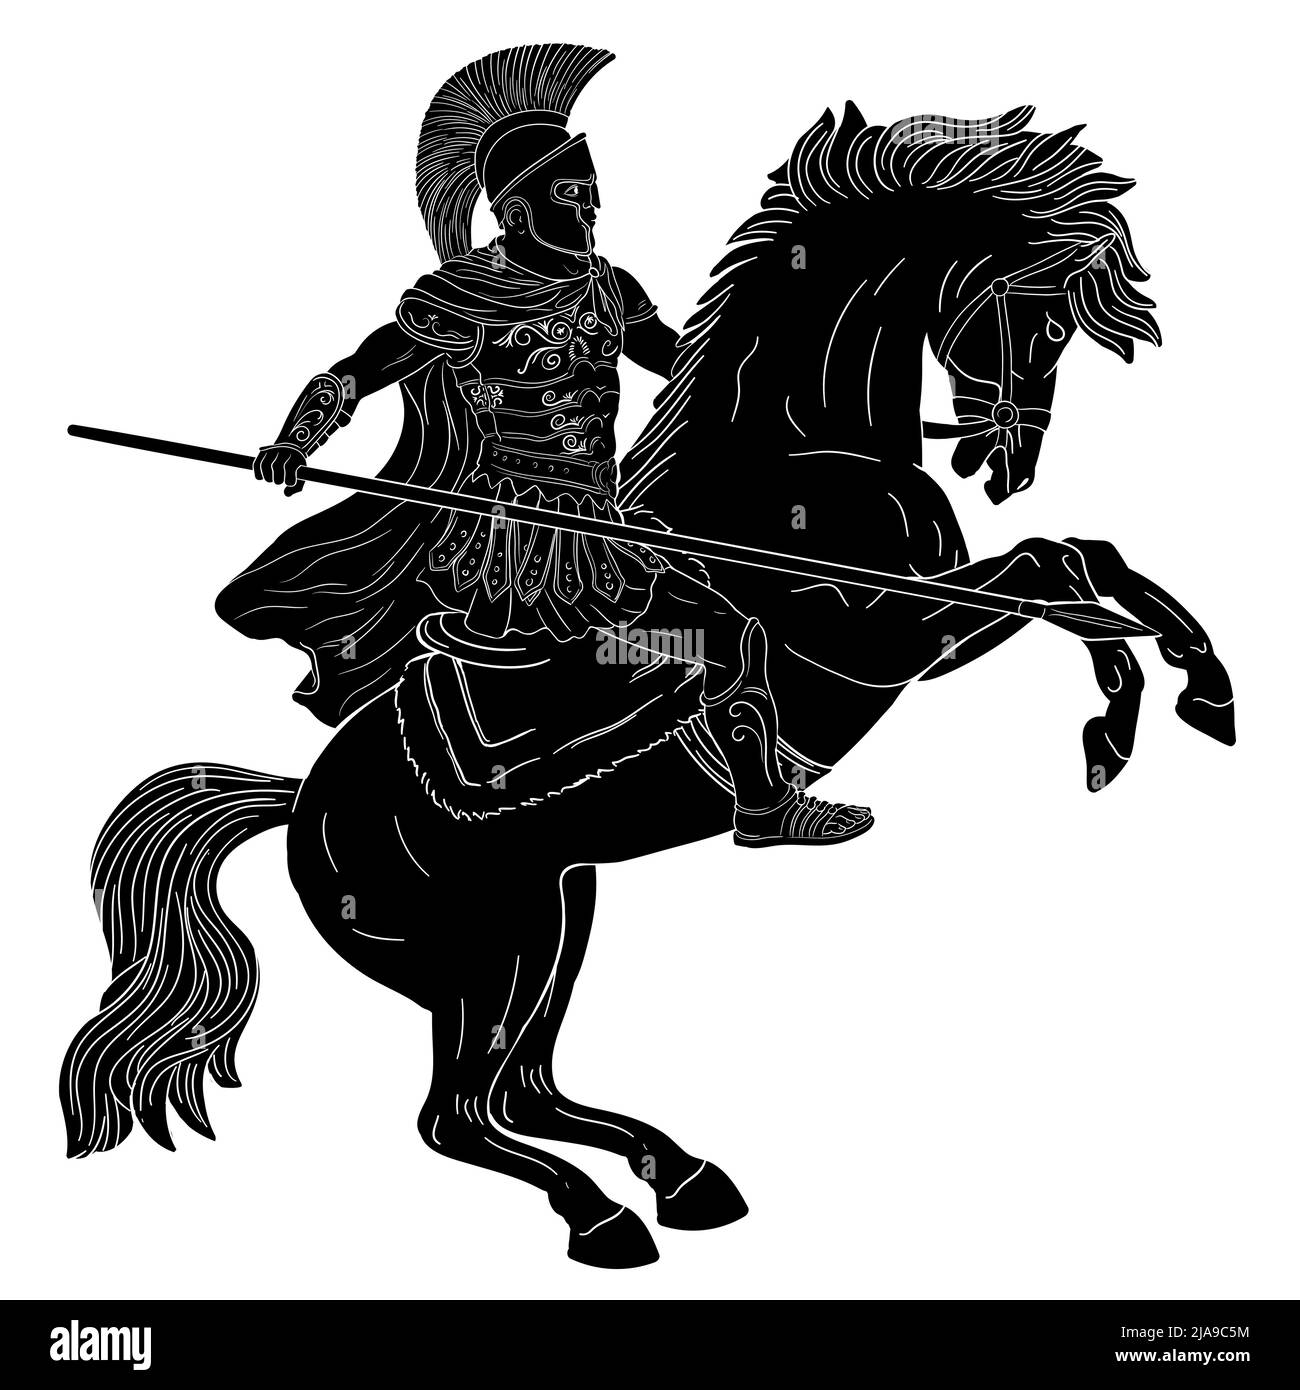 Ancient Roman warrior with a spear in his hands is riding a horse ready to attack. Vector illustration isolated on white background. Stock Vector